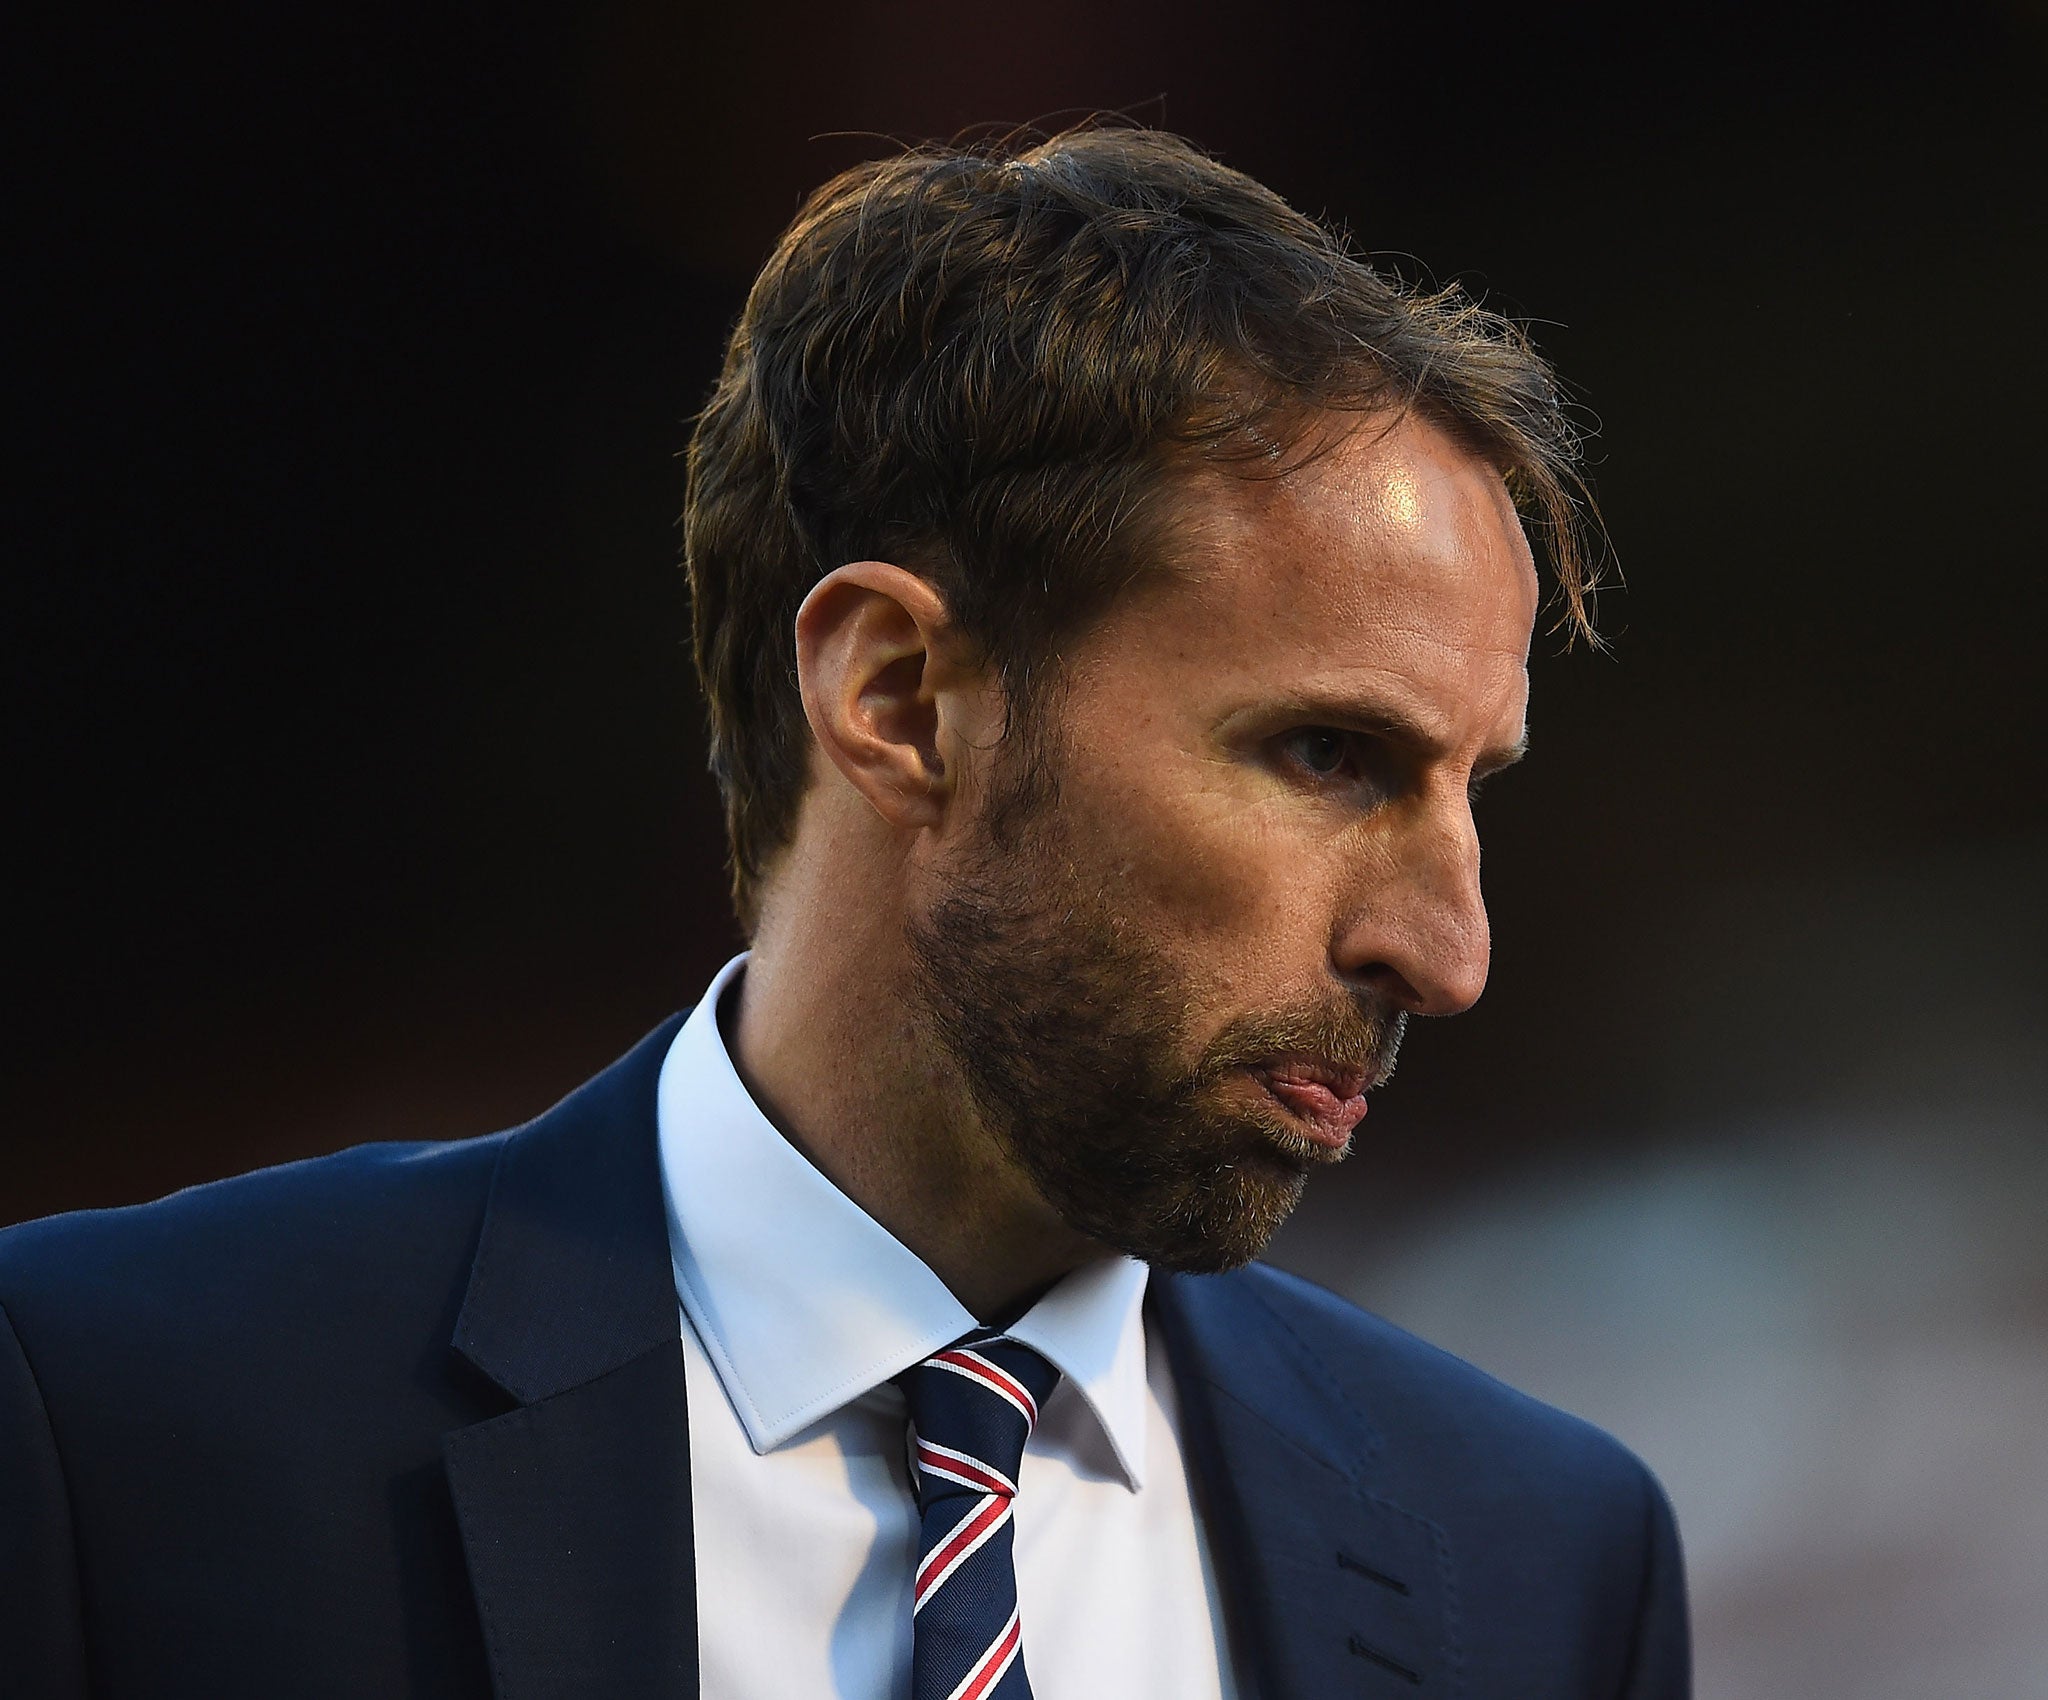 England U21s manager Gareth Southgate wants players to mingle with the locals during the finals